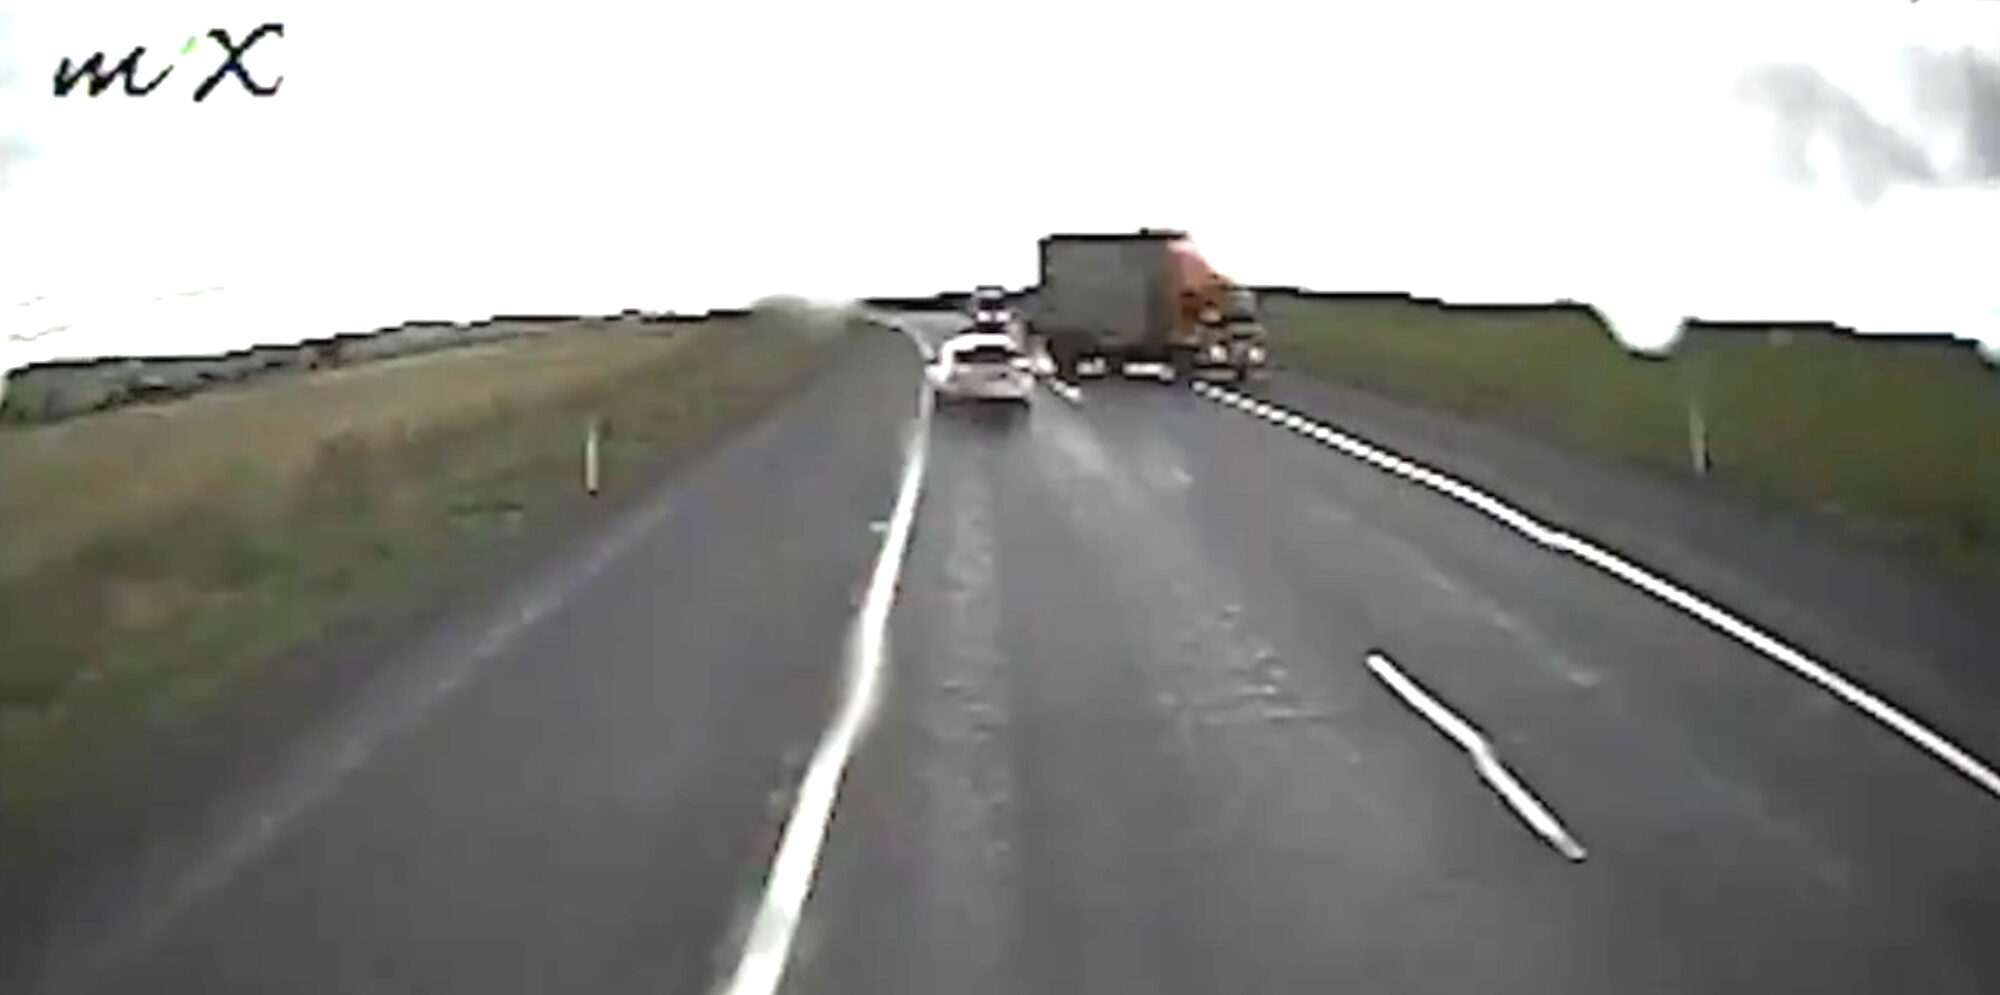 The driver of the white vehicle caused a truck to roll over into a ditch off a highway near Cooma in New South Wales, Australia, on June 24. (@nswpolice/Zenger News)